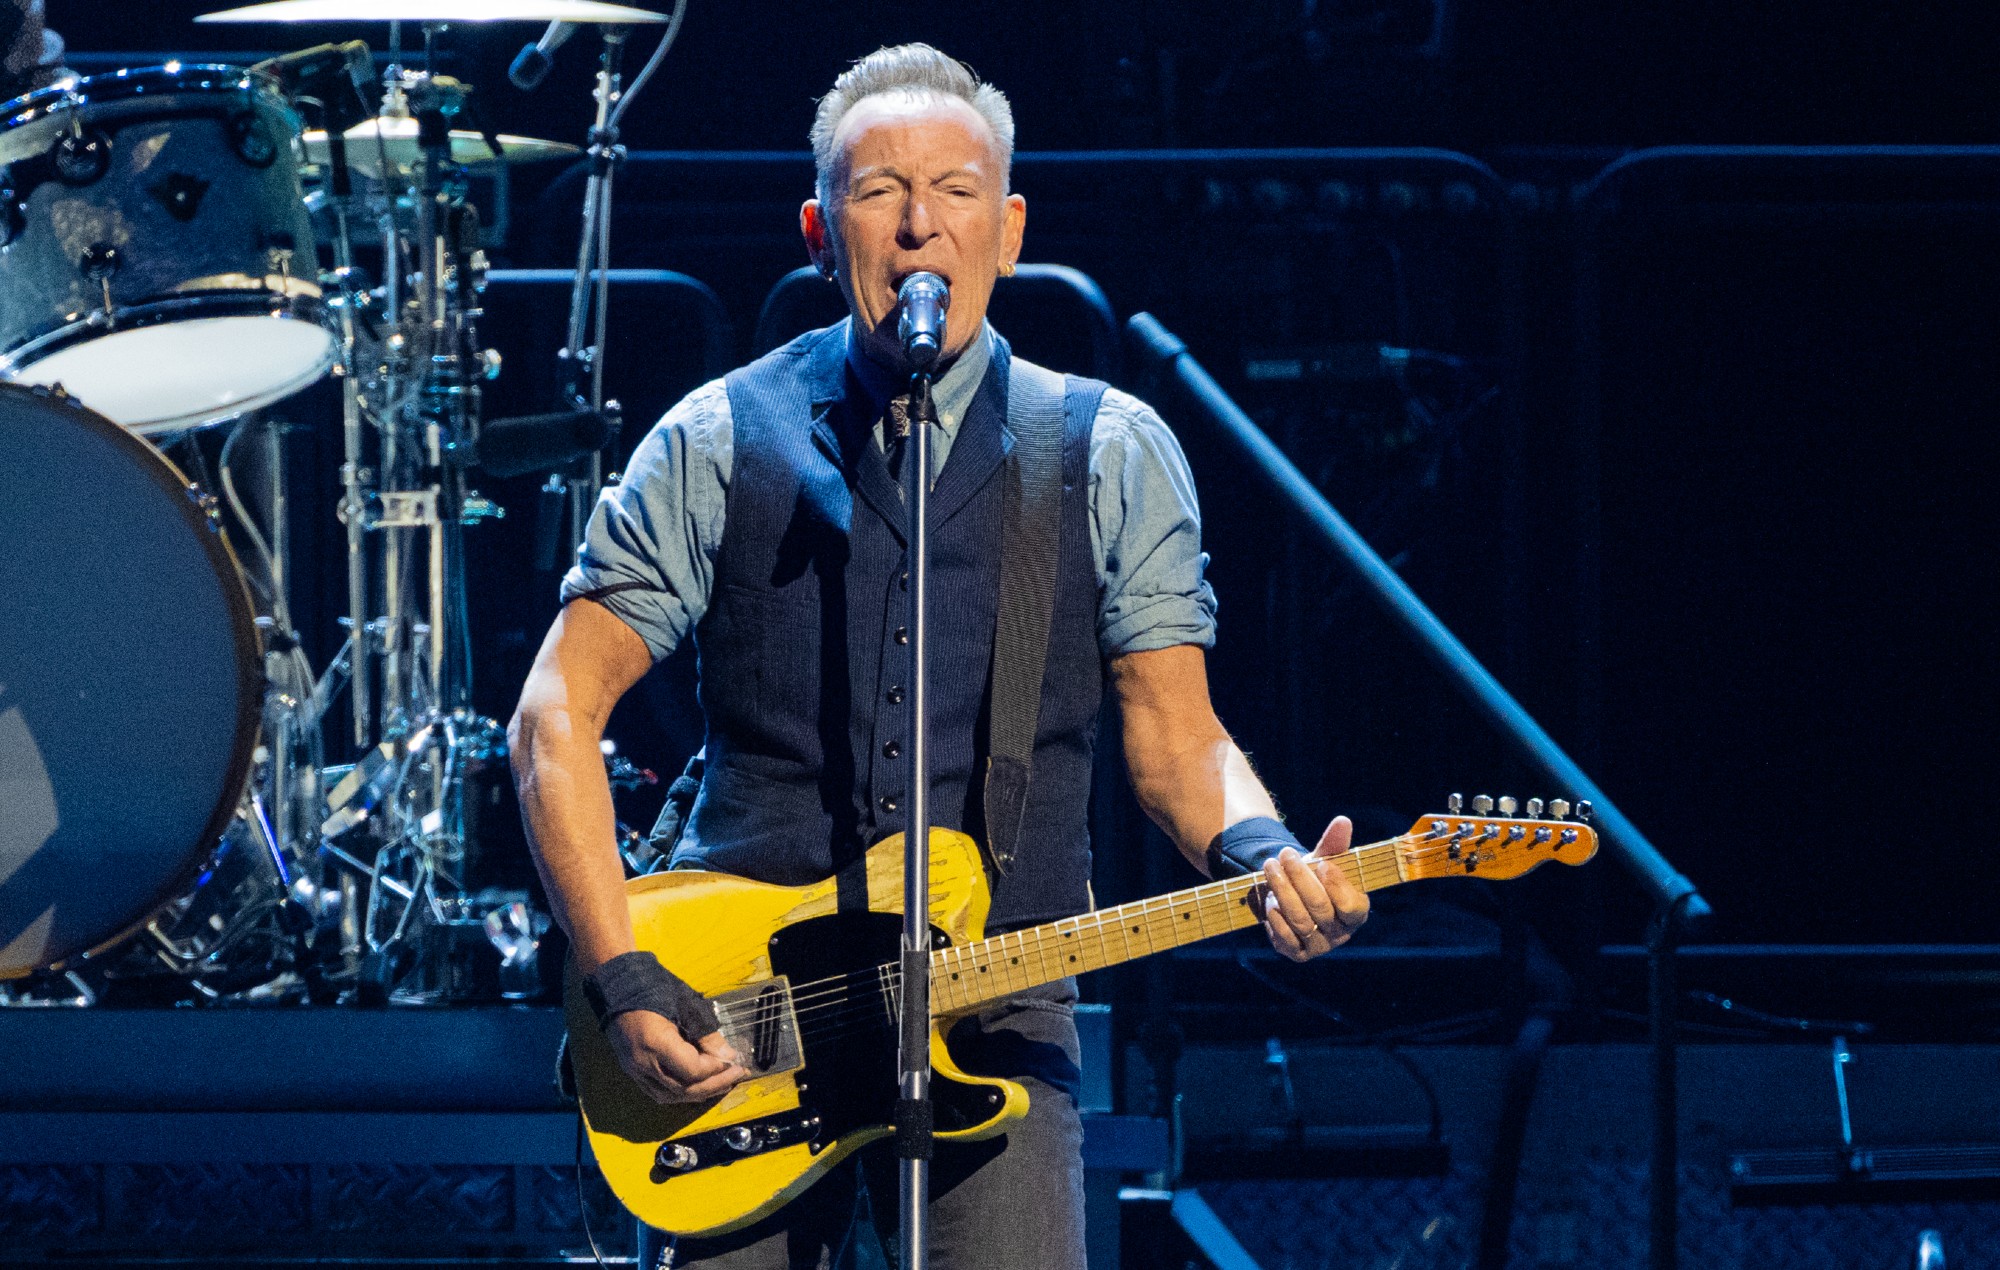 Bruce Springsteen signs absentee note for young fan to cut class